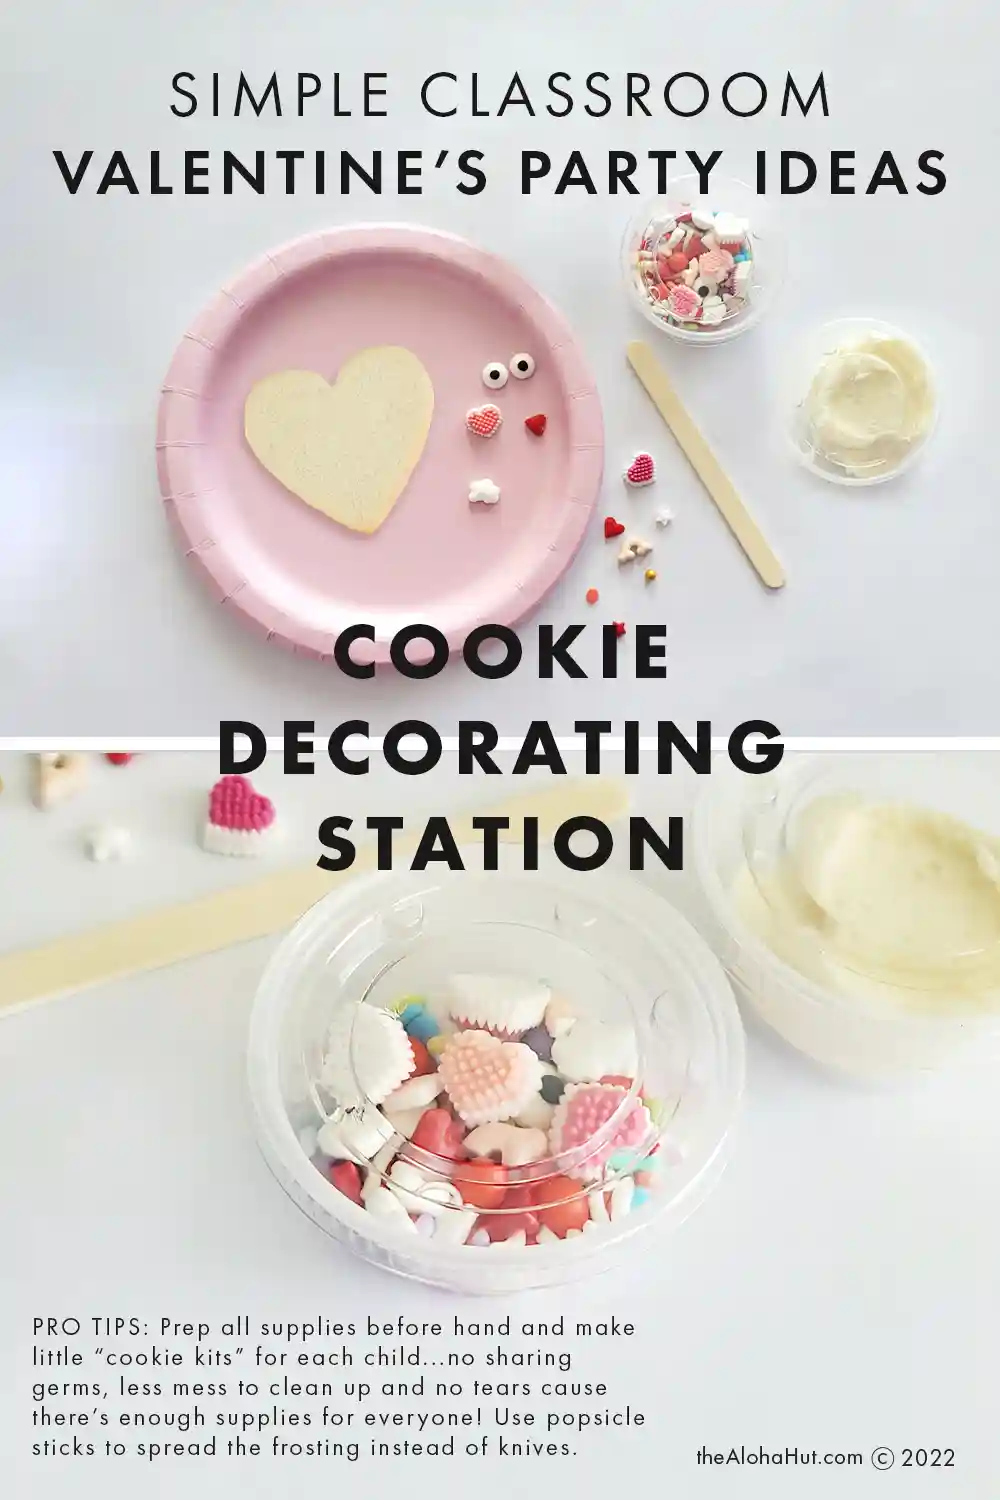 Valentine's Day Classroom Party Ideas - Cookie Decorating Station